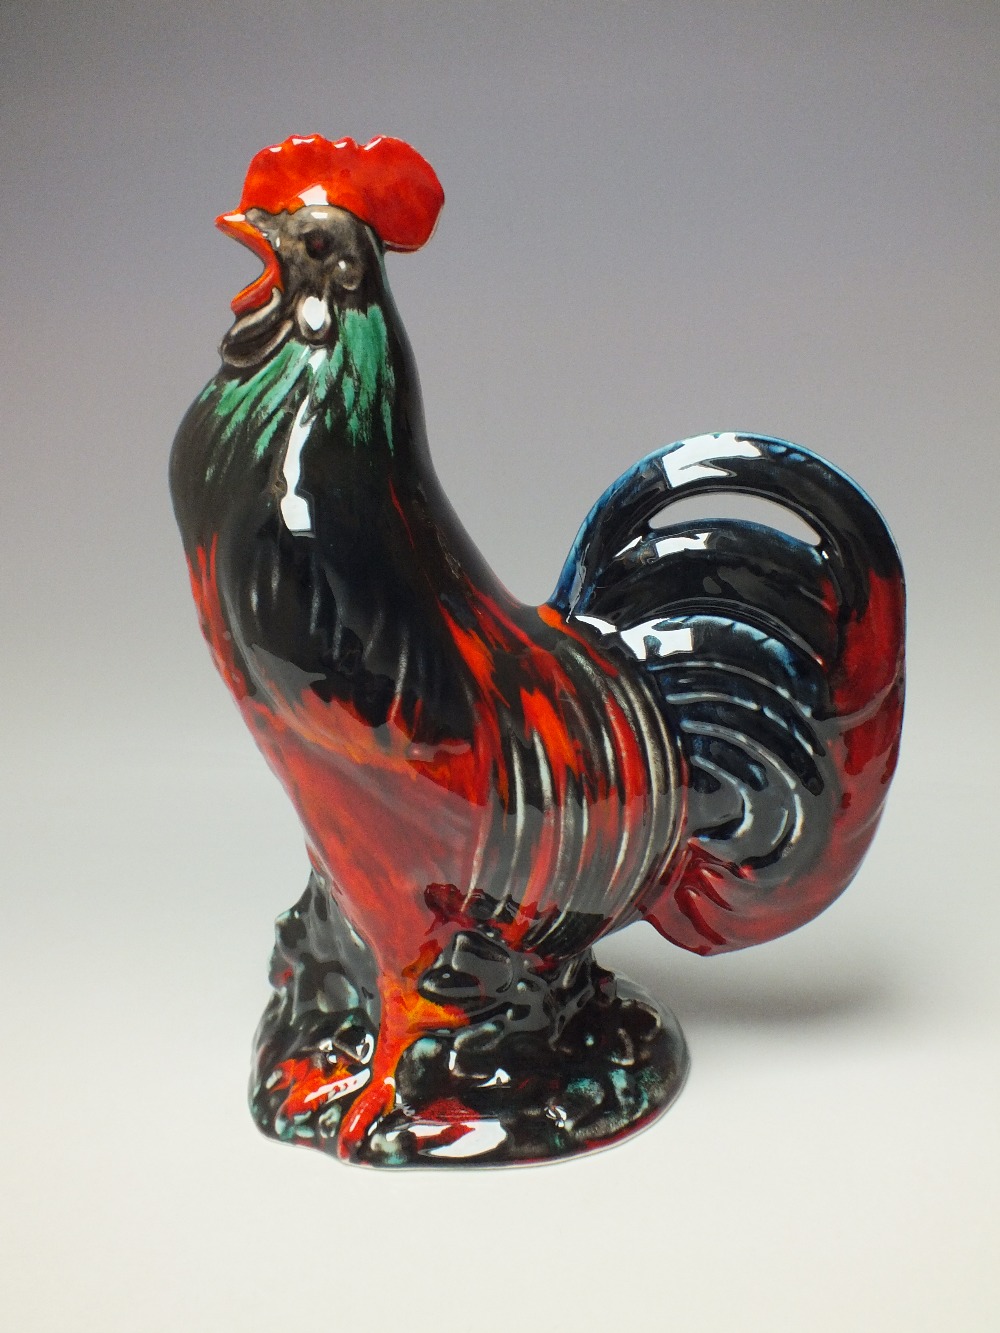 ANITA HARRIS STUDIO POTTERY LARGE COCKEREL FIGURE, painted with red, orange, blue and green - Image 2 of 3